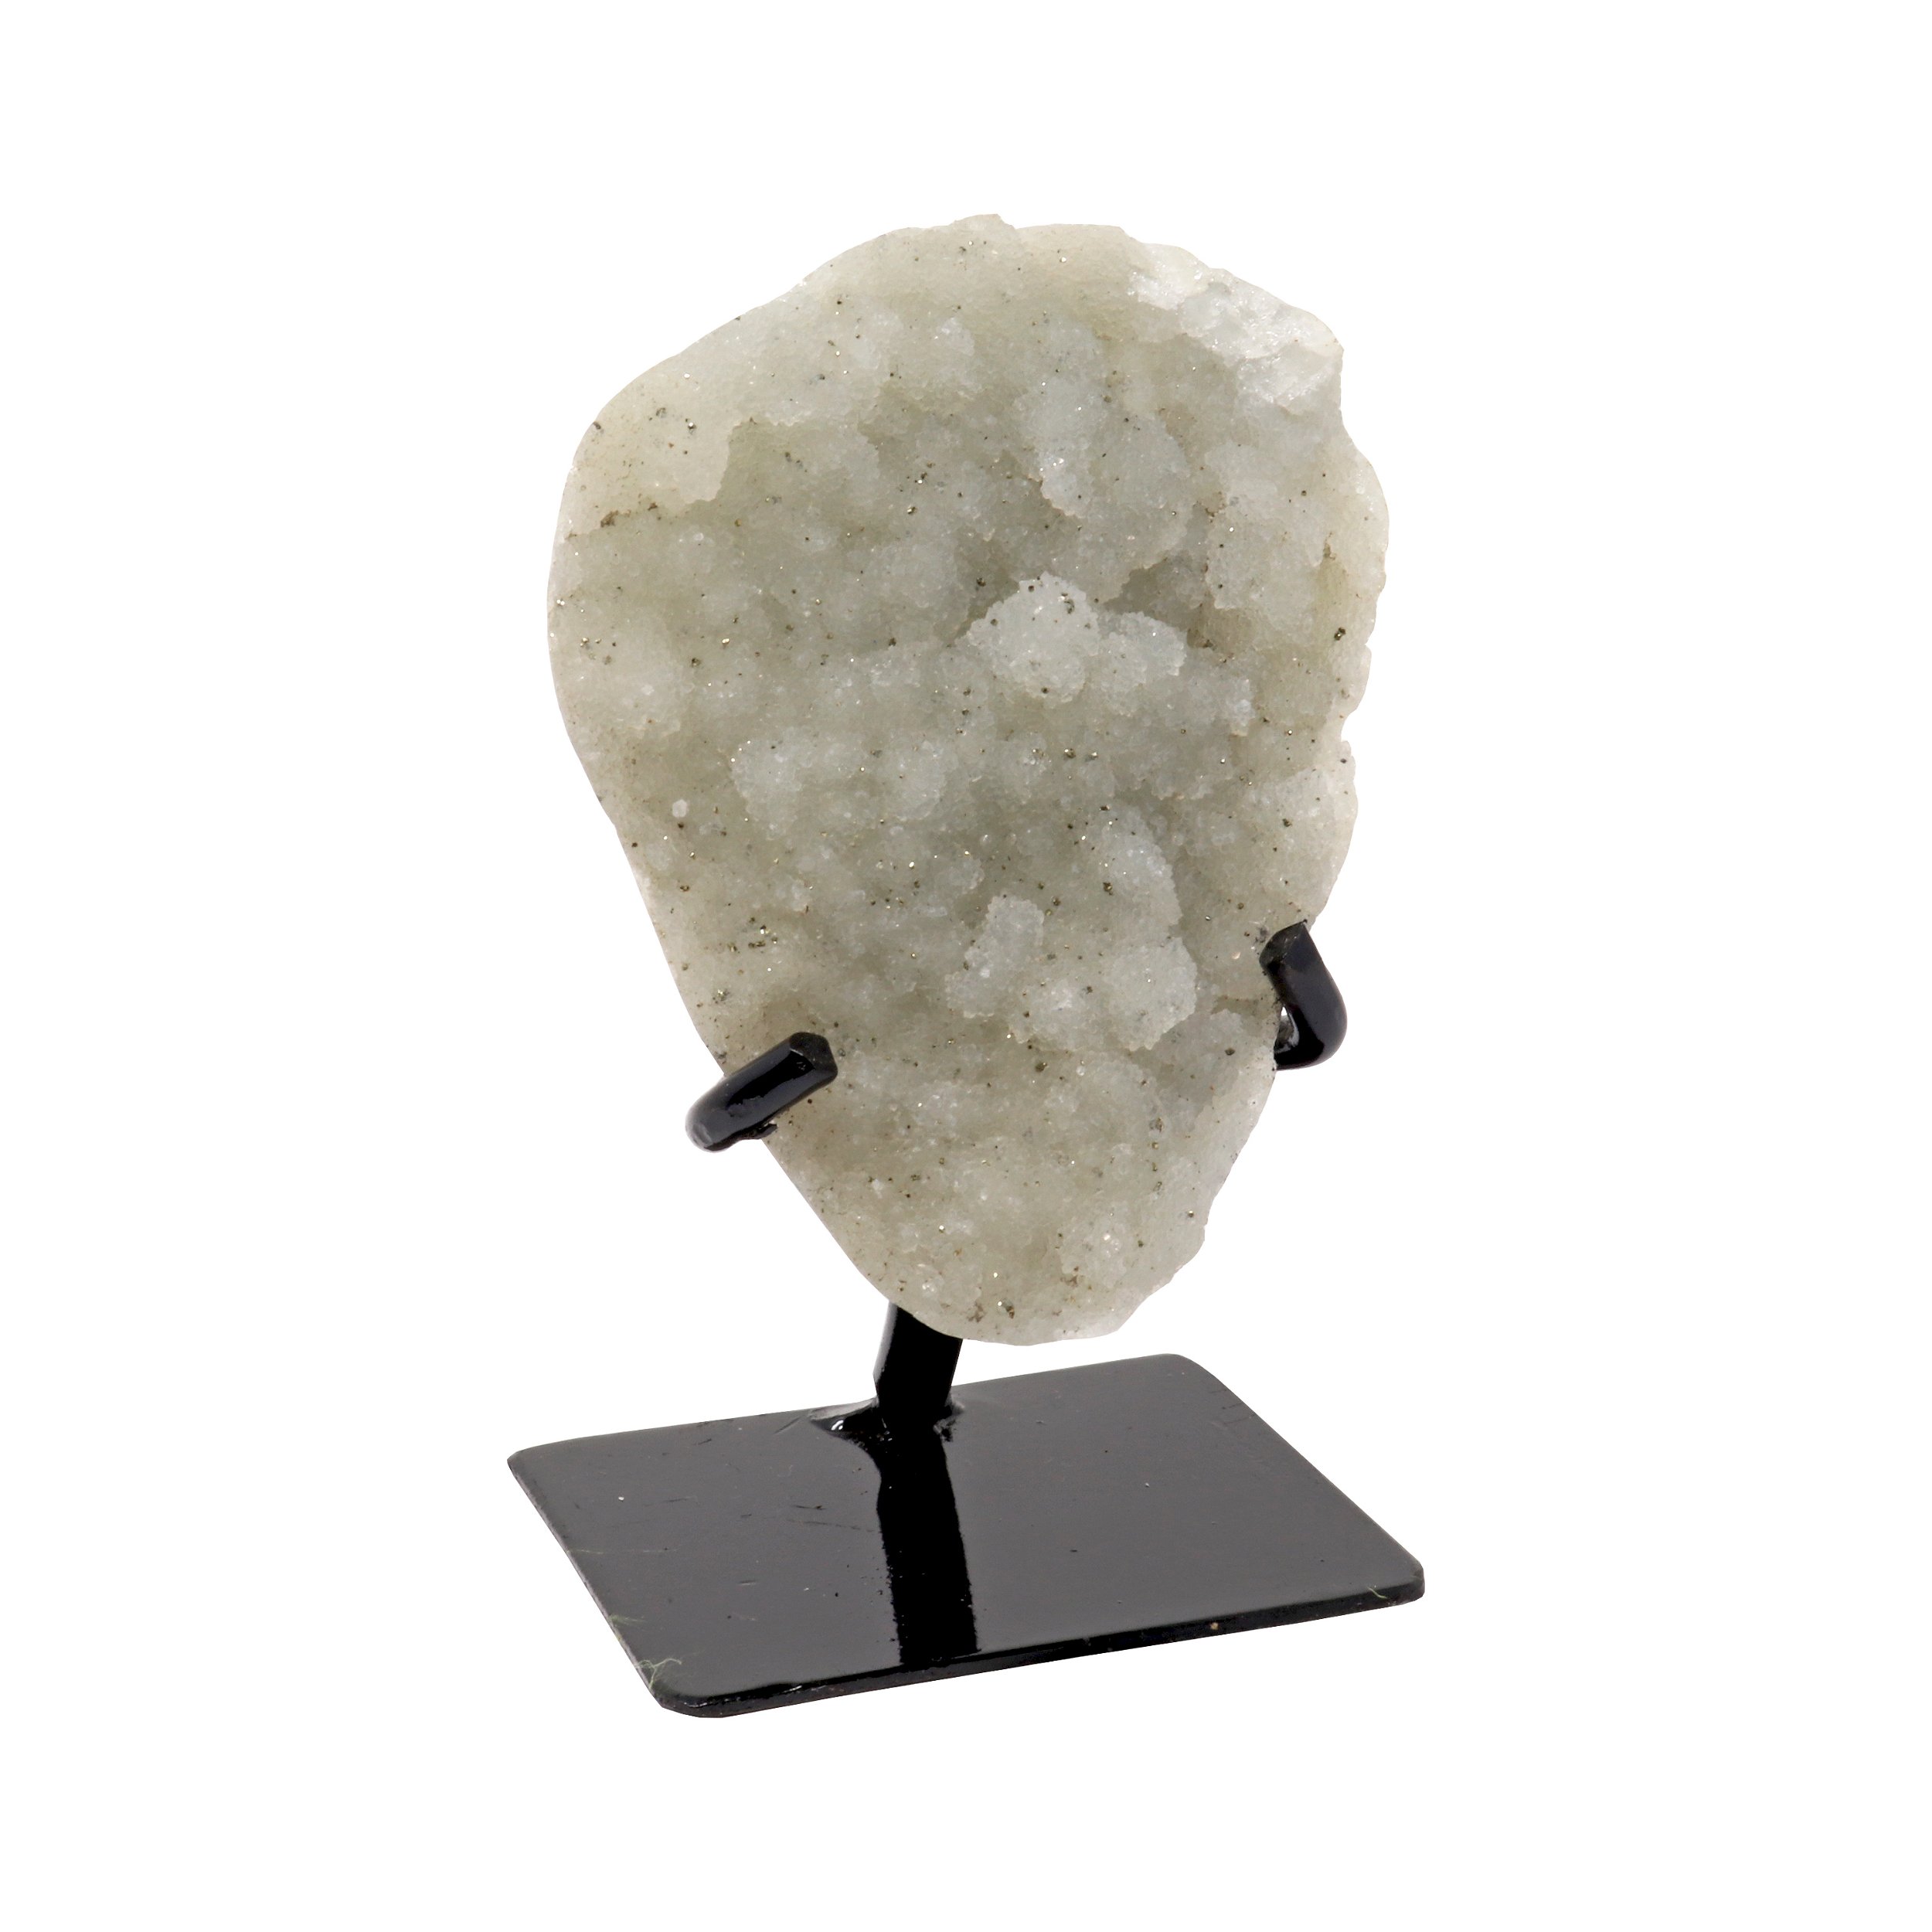 White Quartz Druze On A Fitted Stand